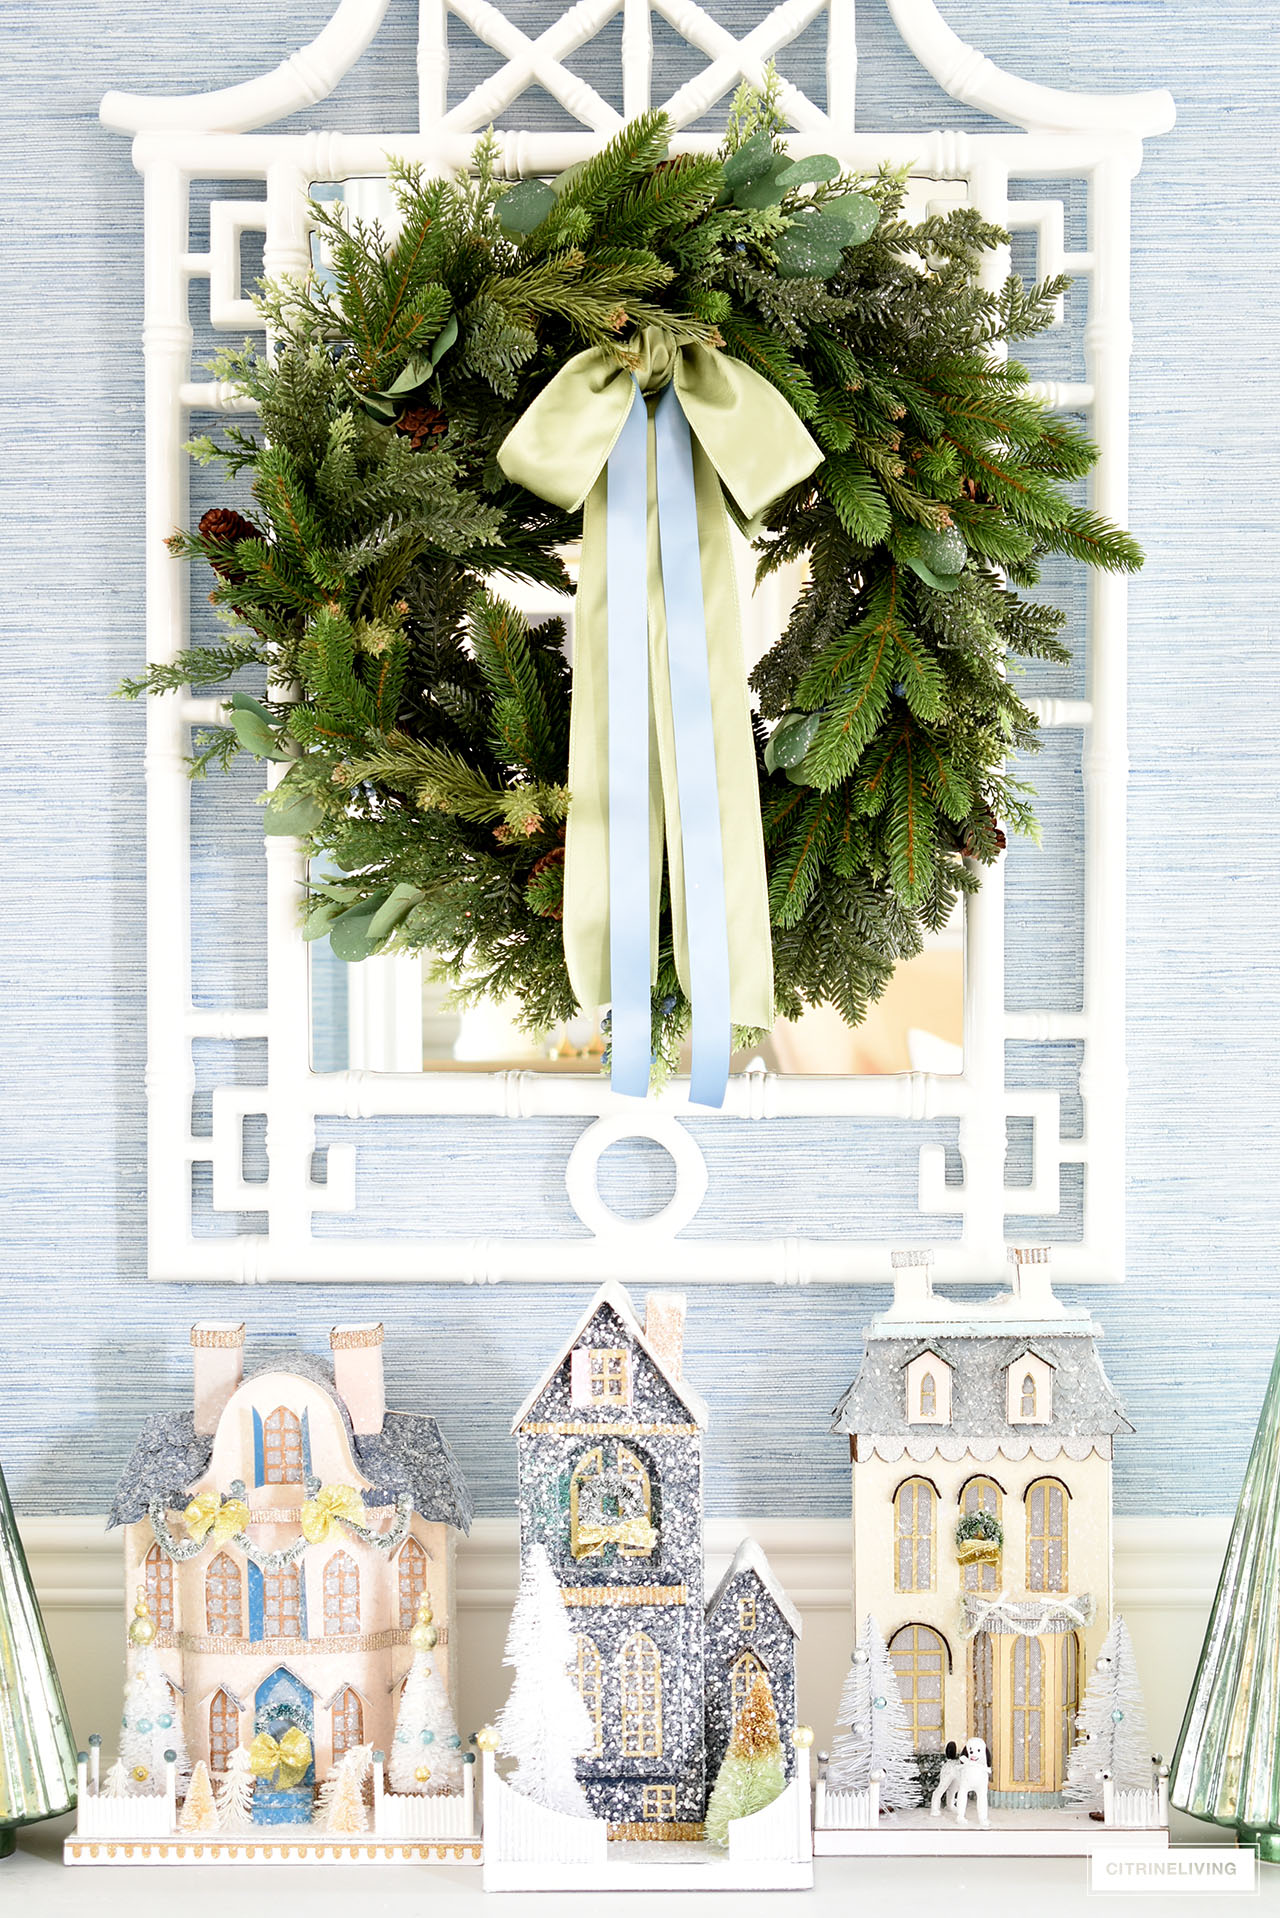 A stunning Christmas display on an entryway console table using vintage inspired Christmas houses, and a lush green wreath hanging about on a white pagoda mirror.